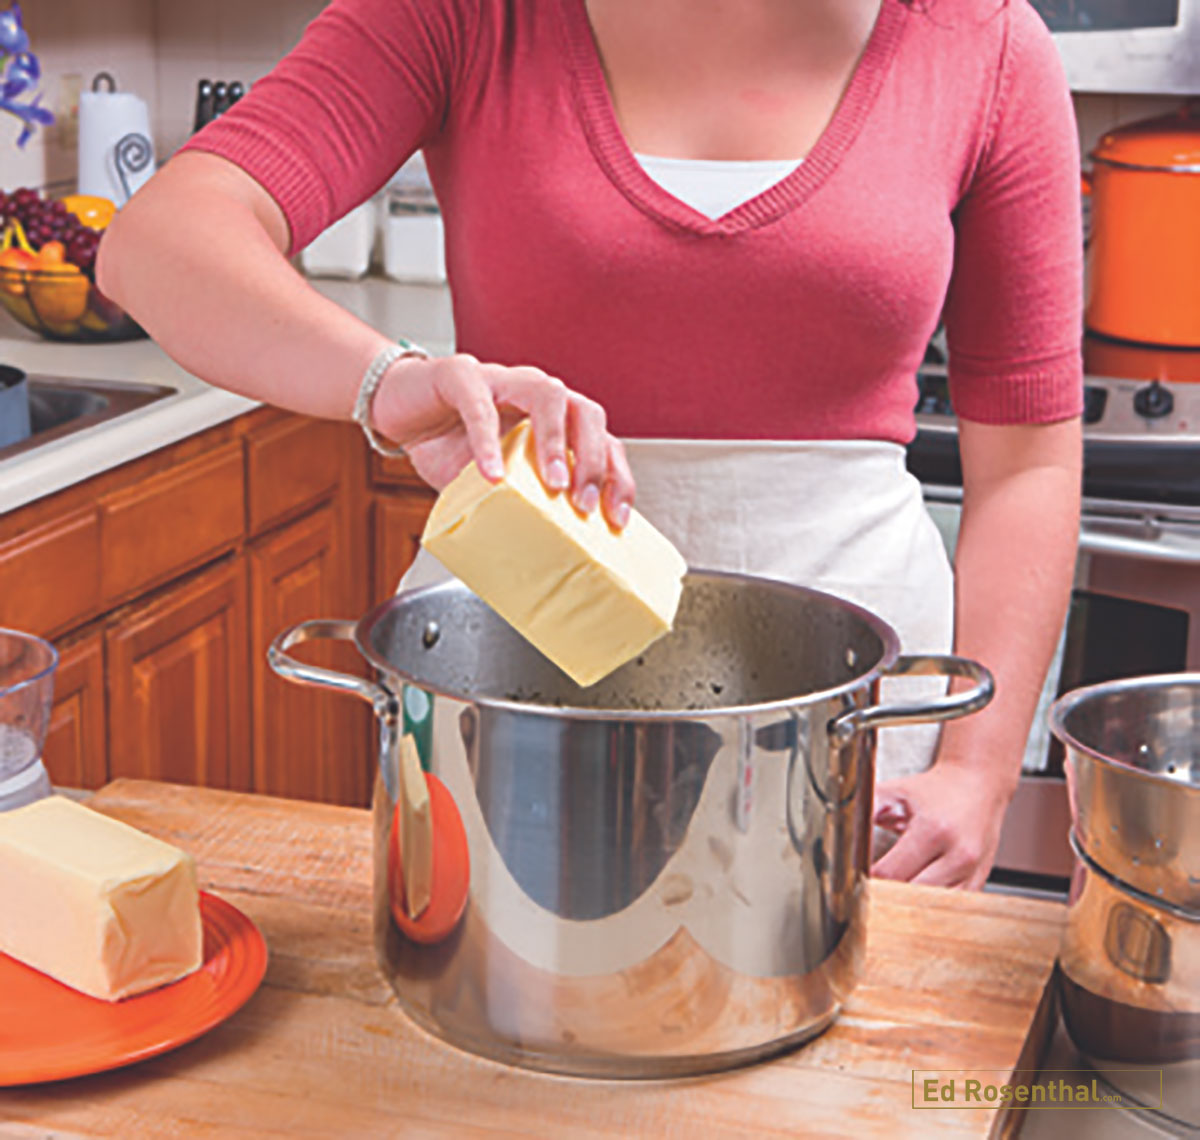  Putting butter into cooking pot